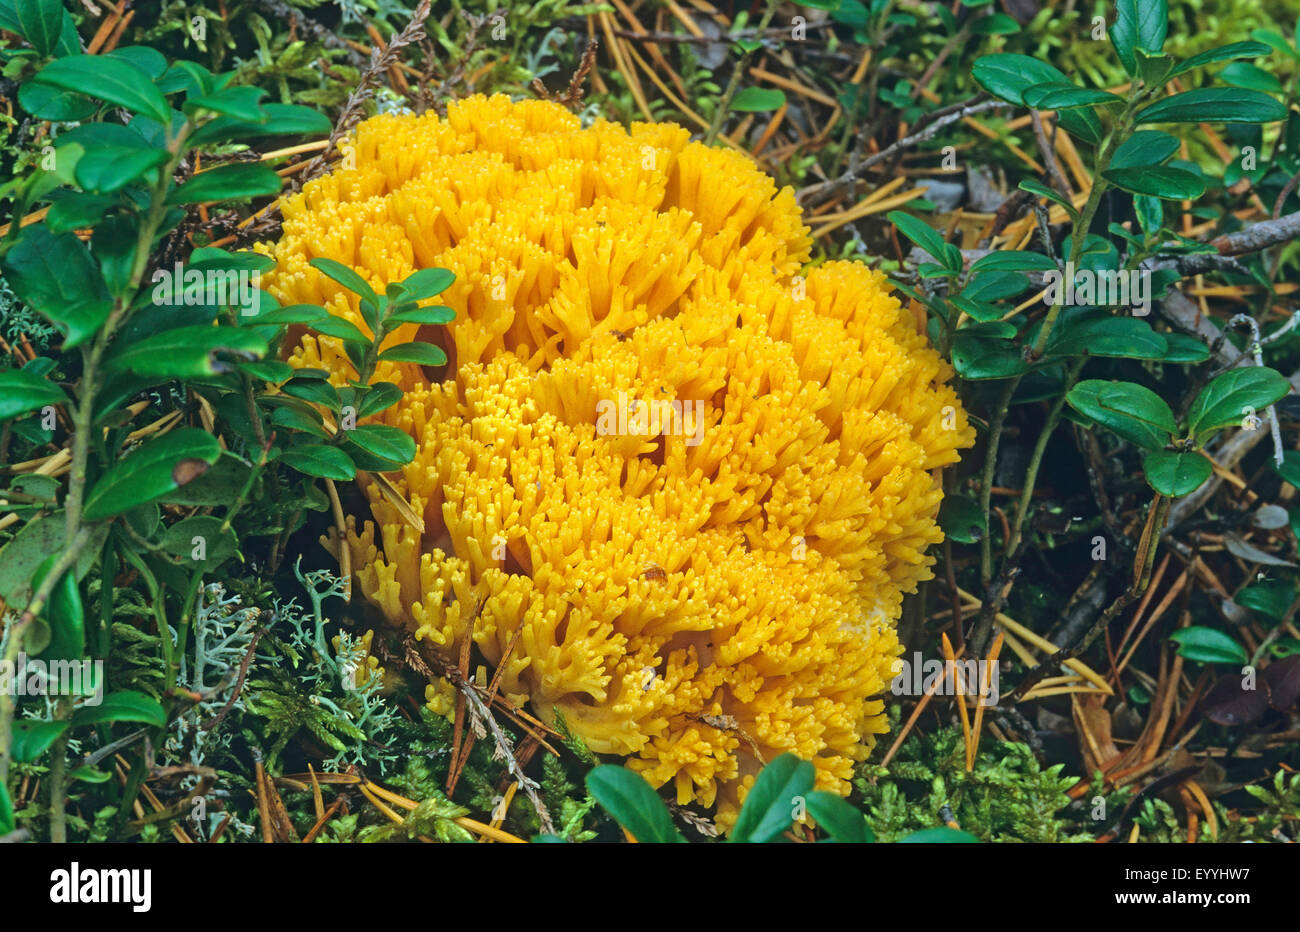 Coral, Corals (Ramaria spec.), fruiting bodies on forest ground, Germany Stock Photo